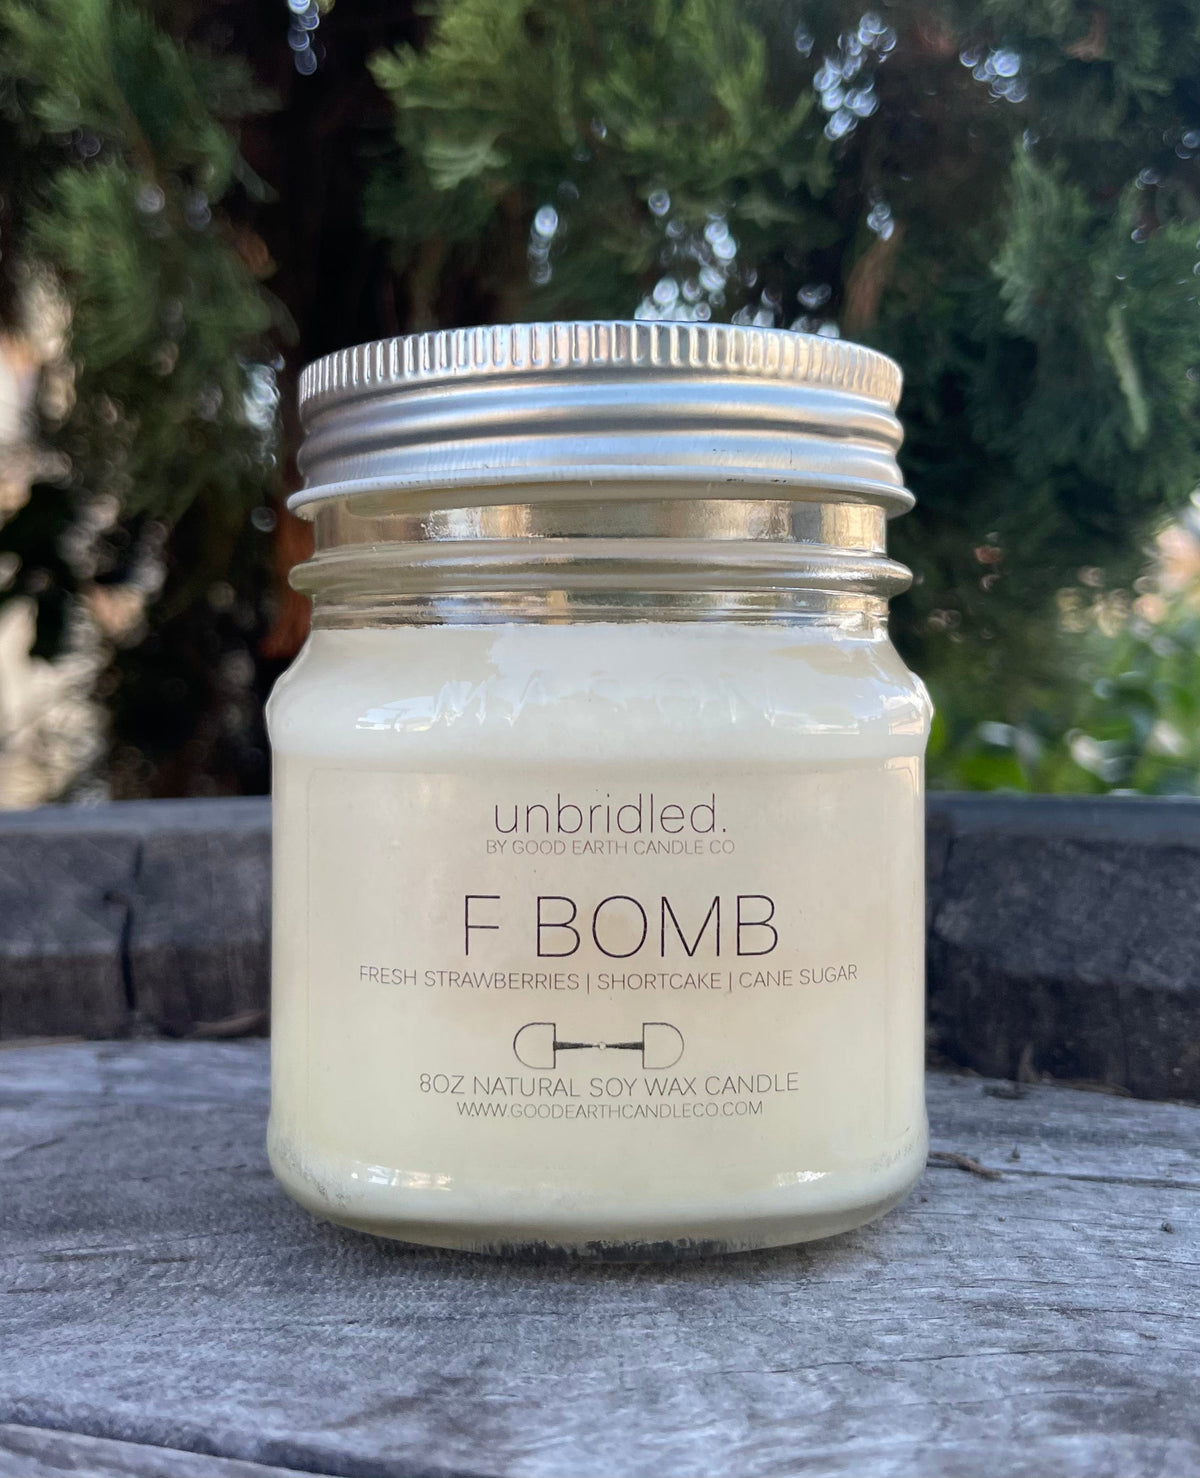 Good Earth candles Good Earth Candle - F Bomb equestrian team apparel online tack store mobile tack store custom farm apparel custom show stable clothing equestrian lifestyle horse show clothing riding clothes horses equestrian tack store